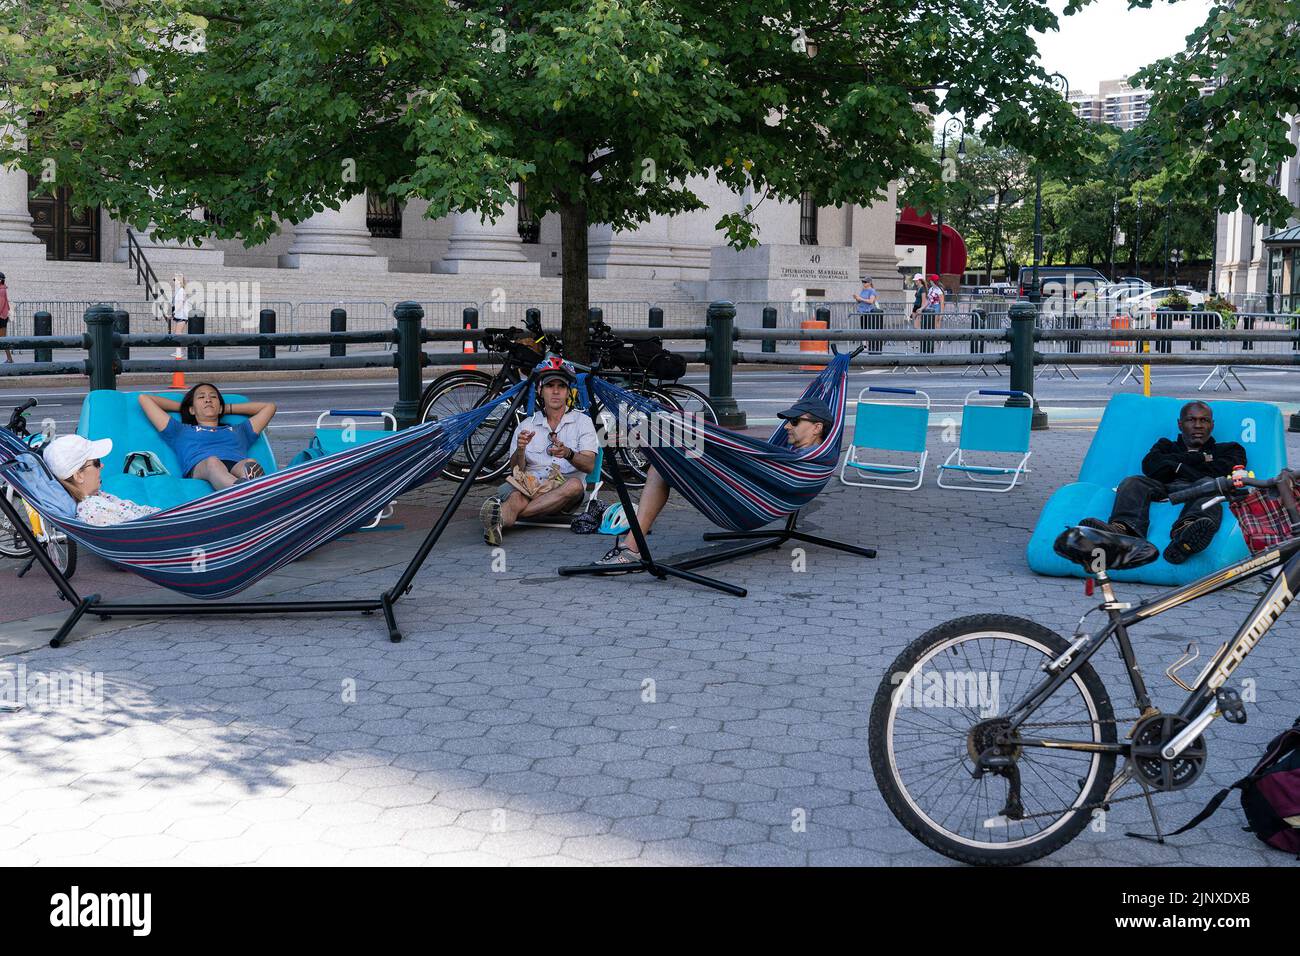 People participate in the Summer Streets program free of car traffic starting at City Hall and along Centre Street and Park Avenue till Harlem. The program includes various physical activities for all ages: Biking, walking and skating along the street free of traffic. At rest stops people can drink water, repair bicycles, rest using hammocks, play for kids, receive free helmets provided by the Department of transportation, free food and drinks samples, and many more. (Photo by Lev Radin/Pacific Press) Stock Photo